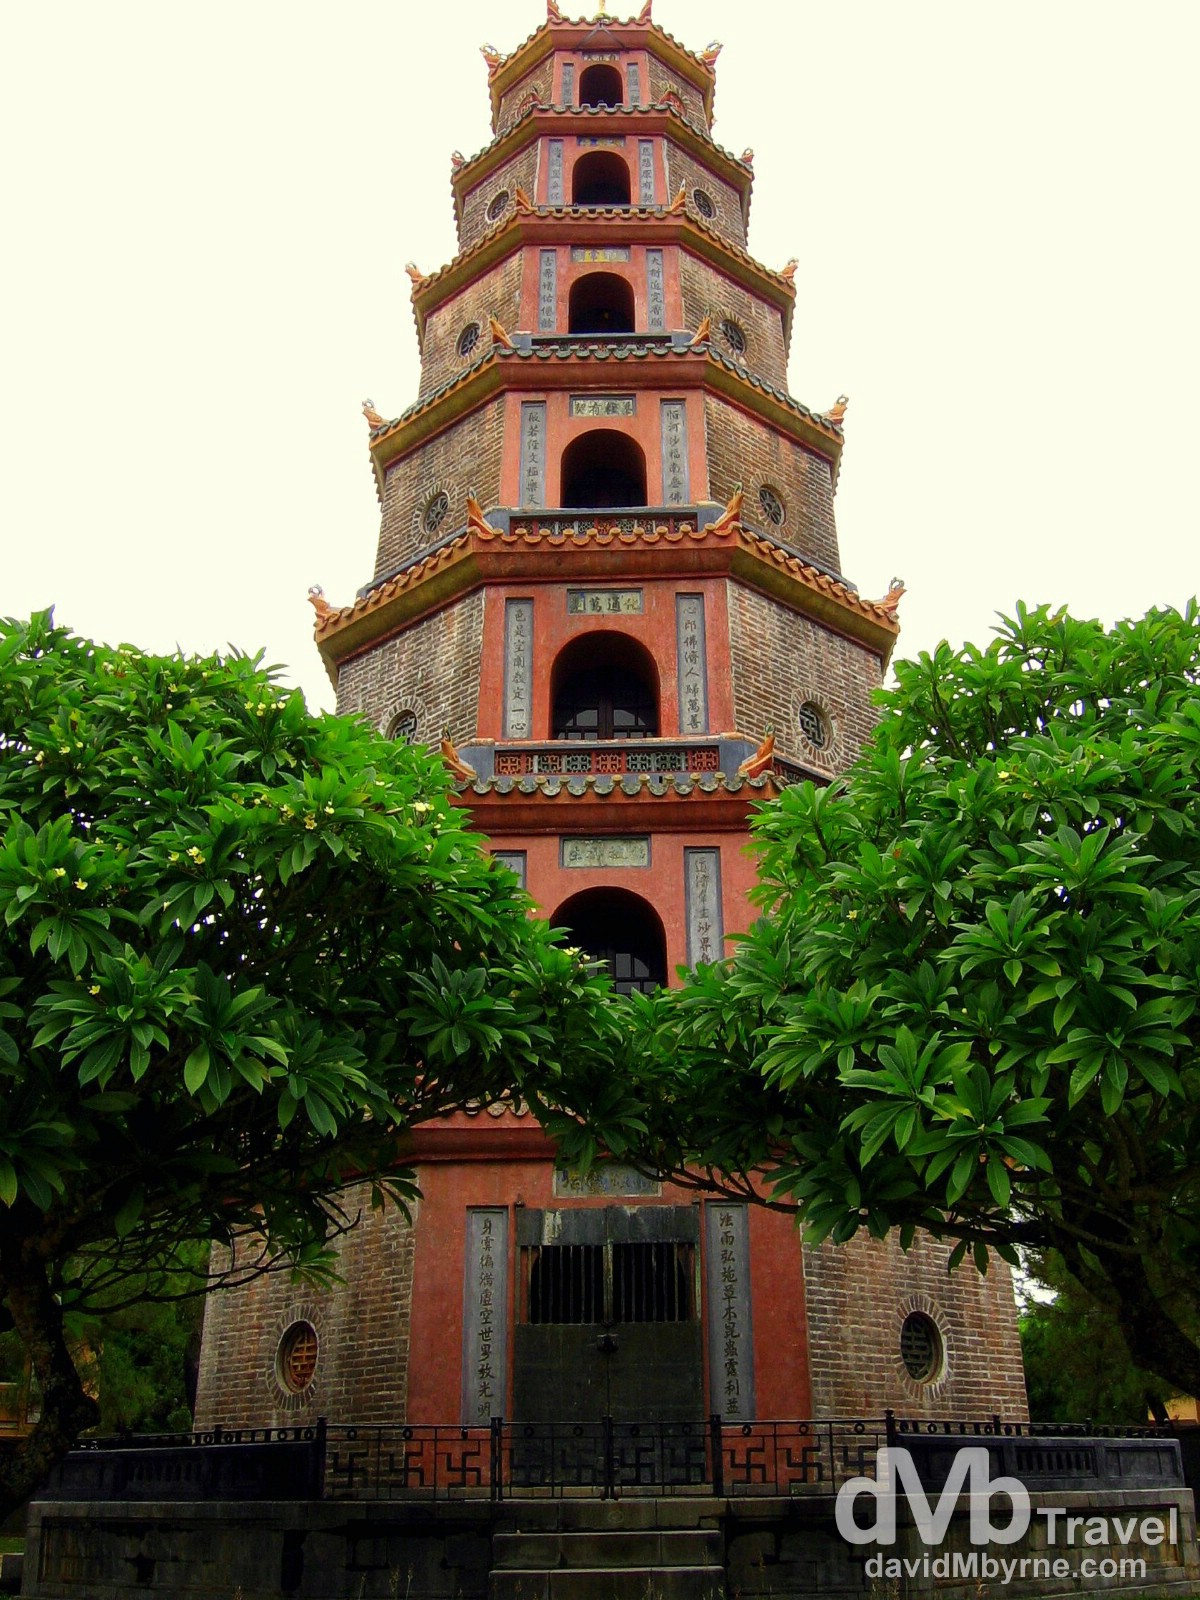 The iconic Thien Mu Pagoda on the banks of the Perfume River in Hue, Vietnam. September 8th 2005.